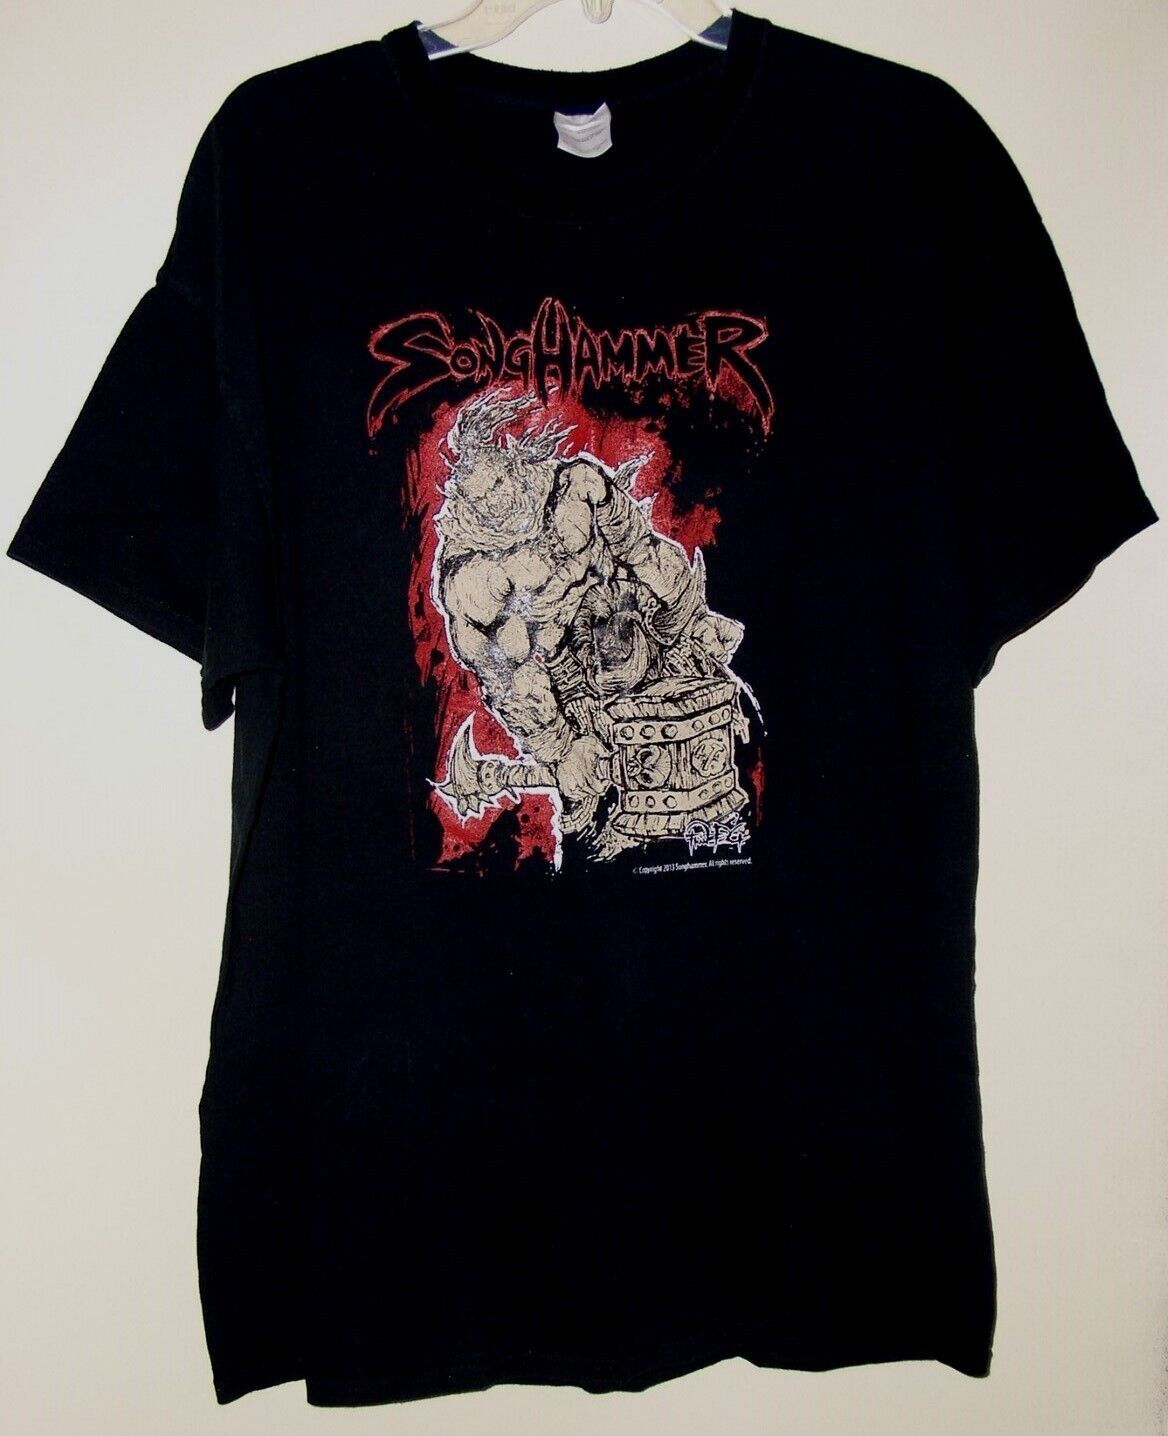 Songhammer Concert Tour T Shirt Vintage 2013 Death Is On The Way X-Large - $164.99